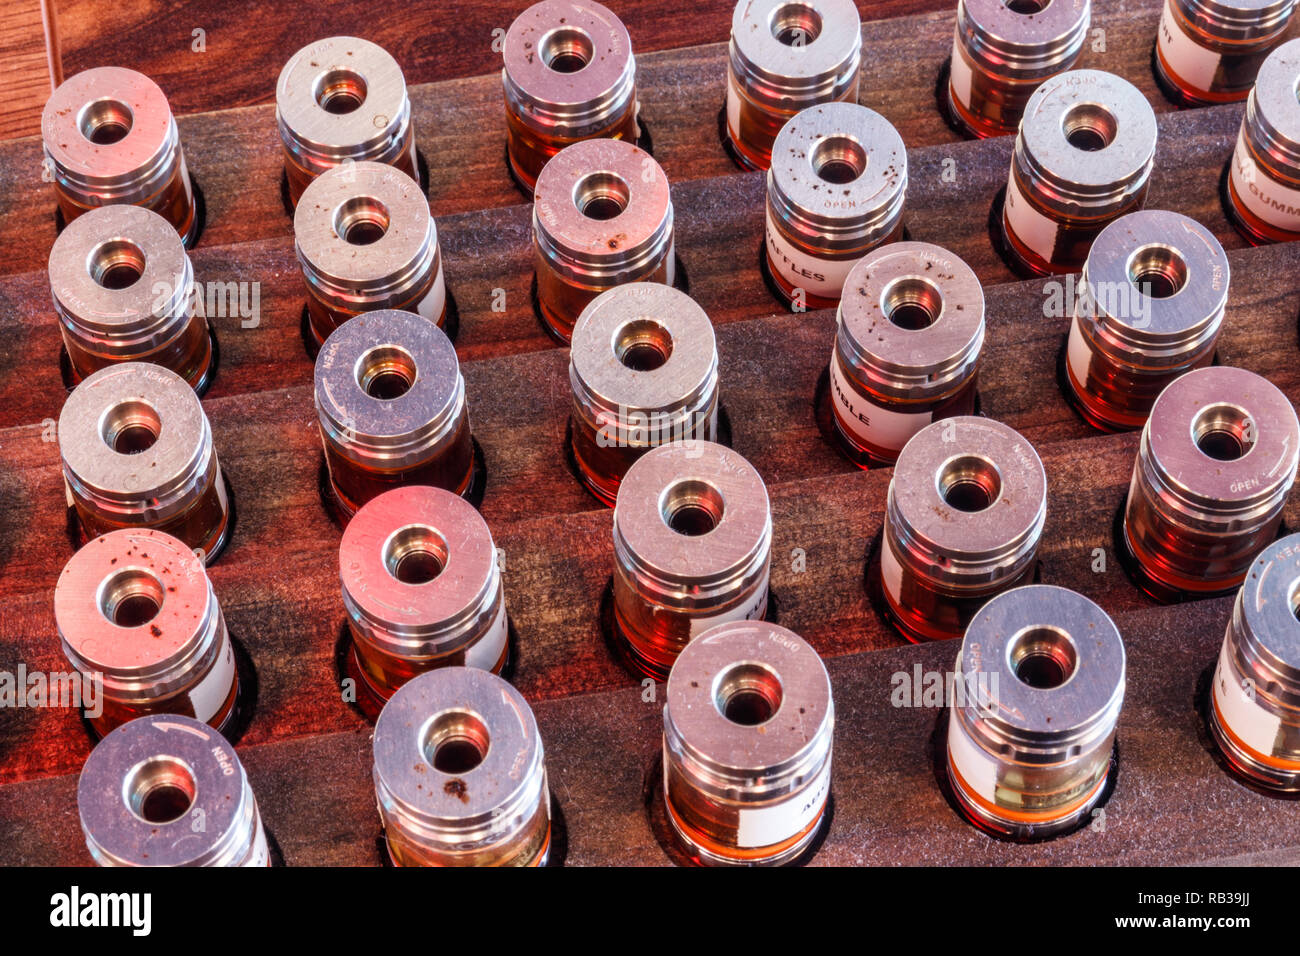 Sample Vape Juice Canisters. The benefits of vaping as a way to quit smoking far outweigh the health risks V Stock Photo